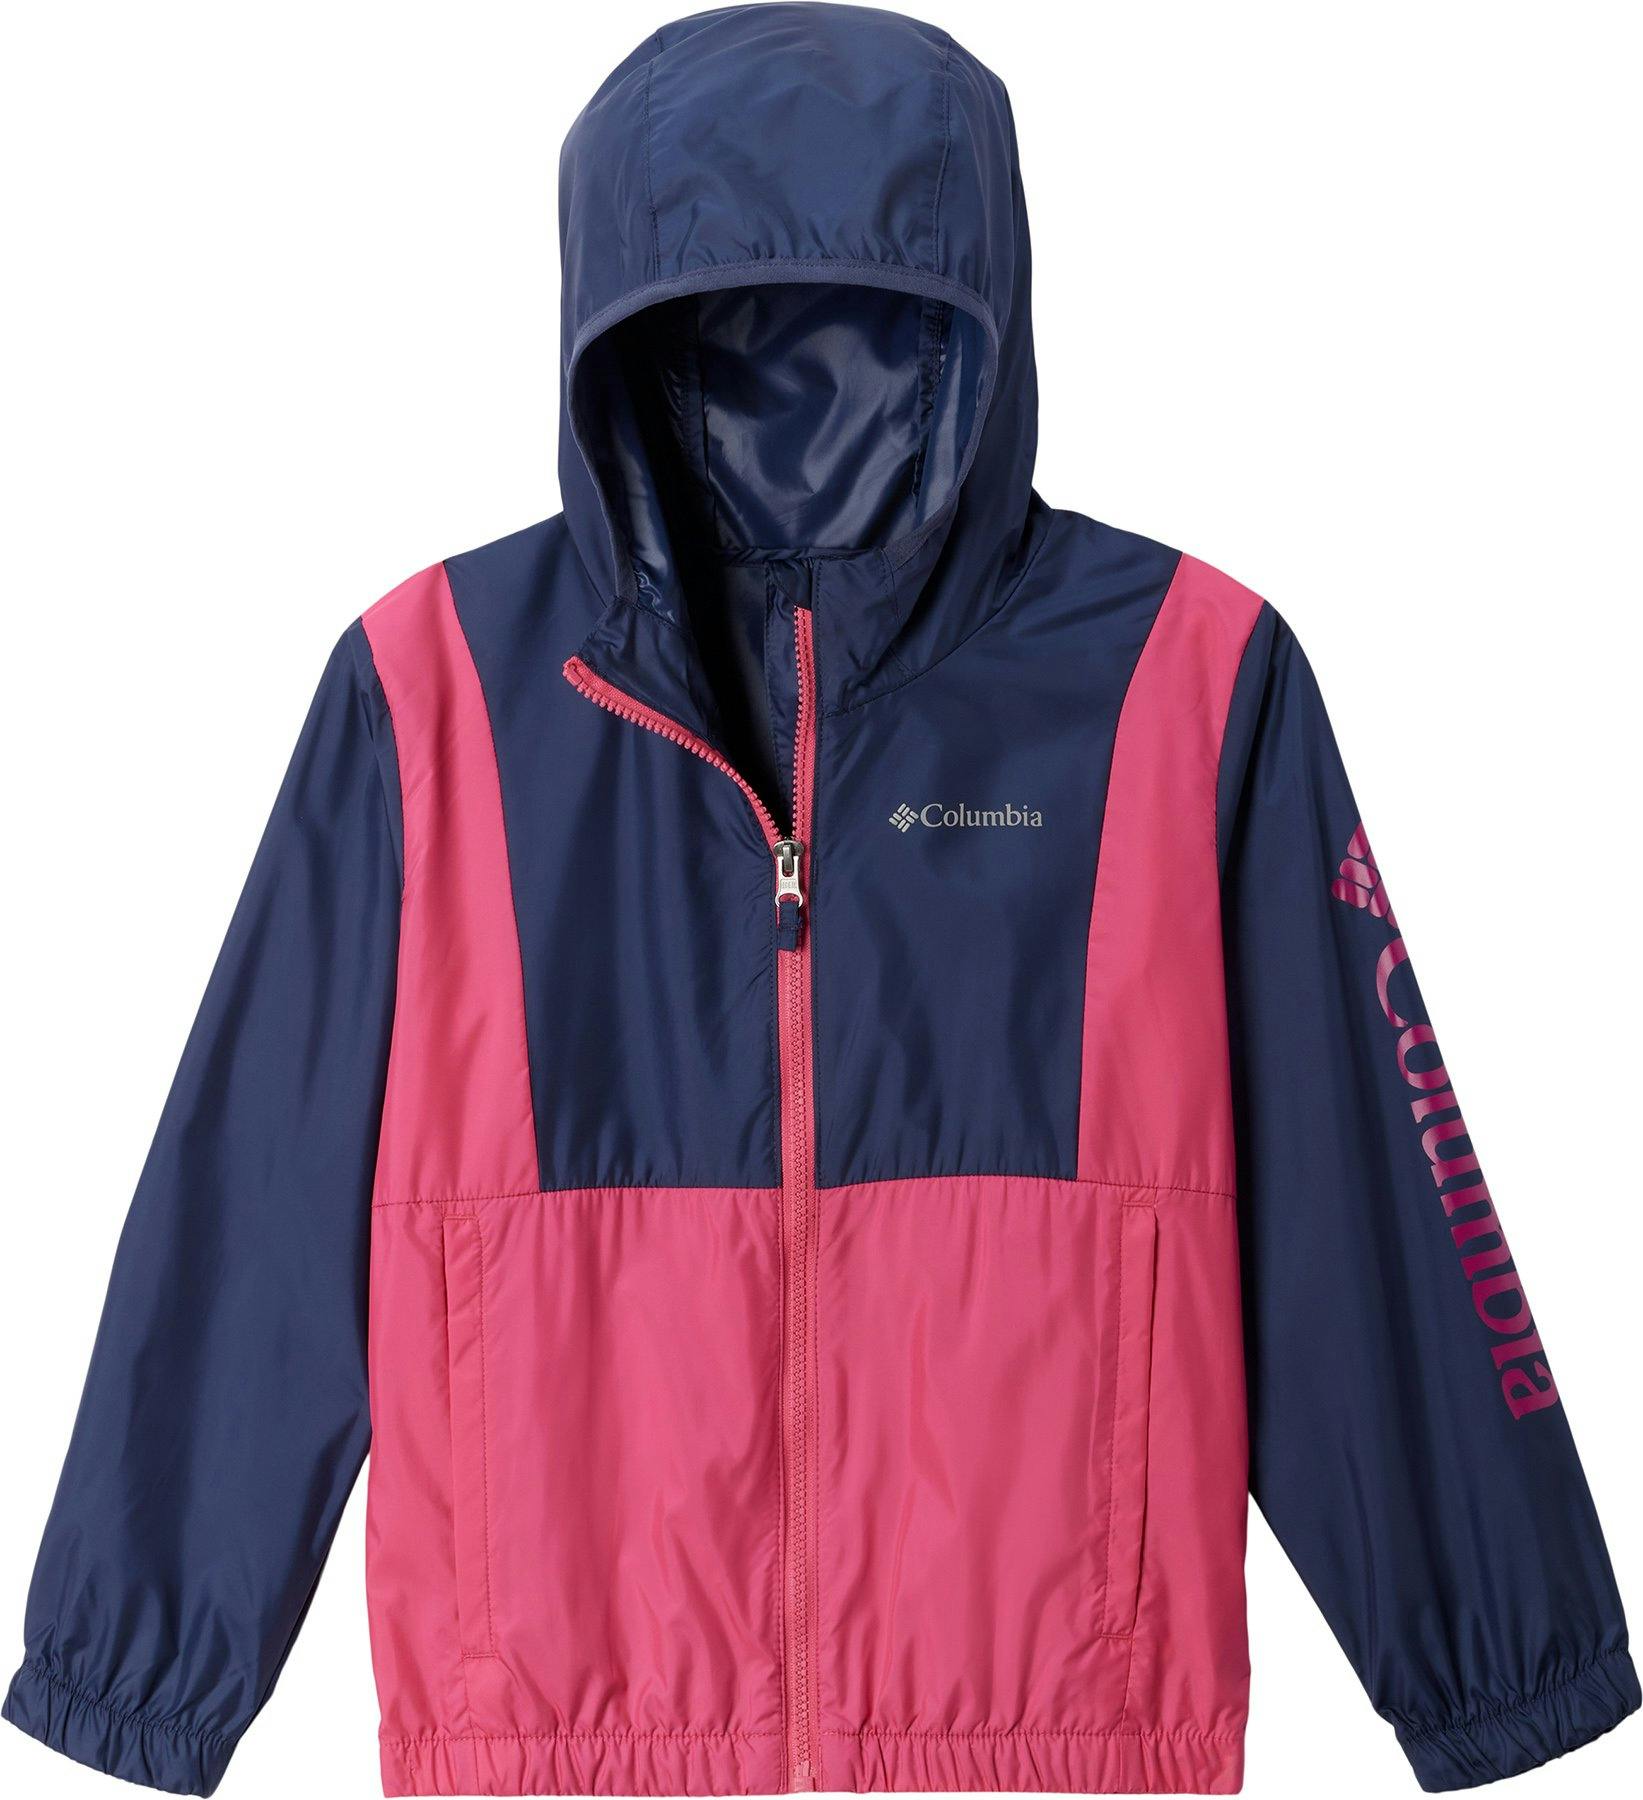 Product image for Lily Basin Jacket - Girl's